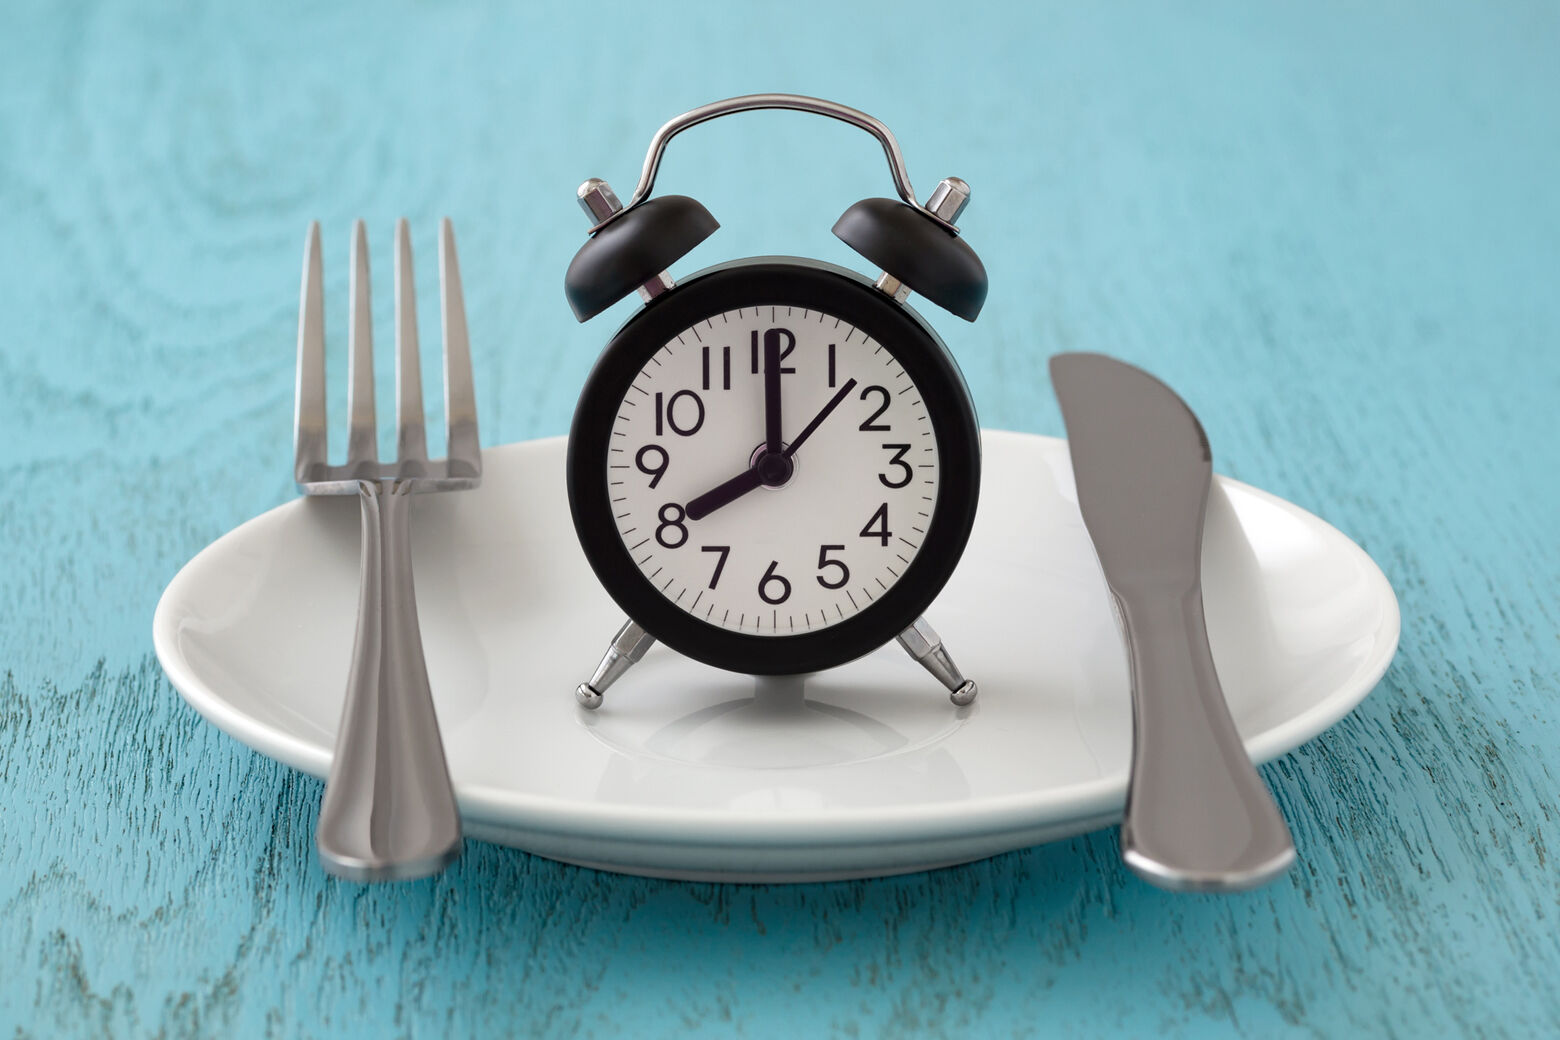 Intermittent Fasting 101 … What is it and how does it work?